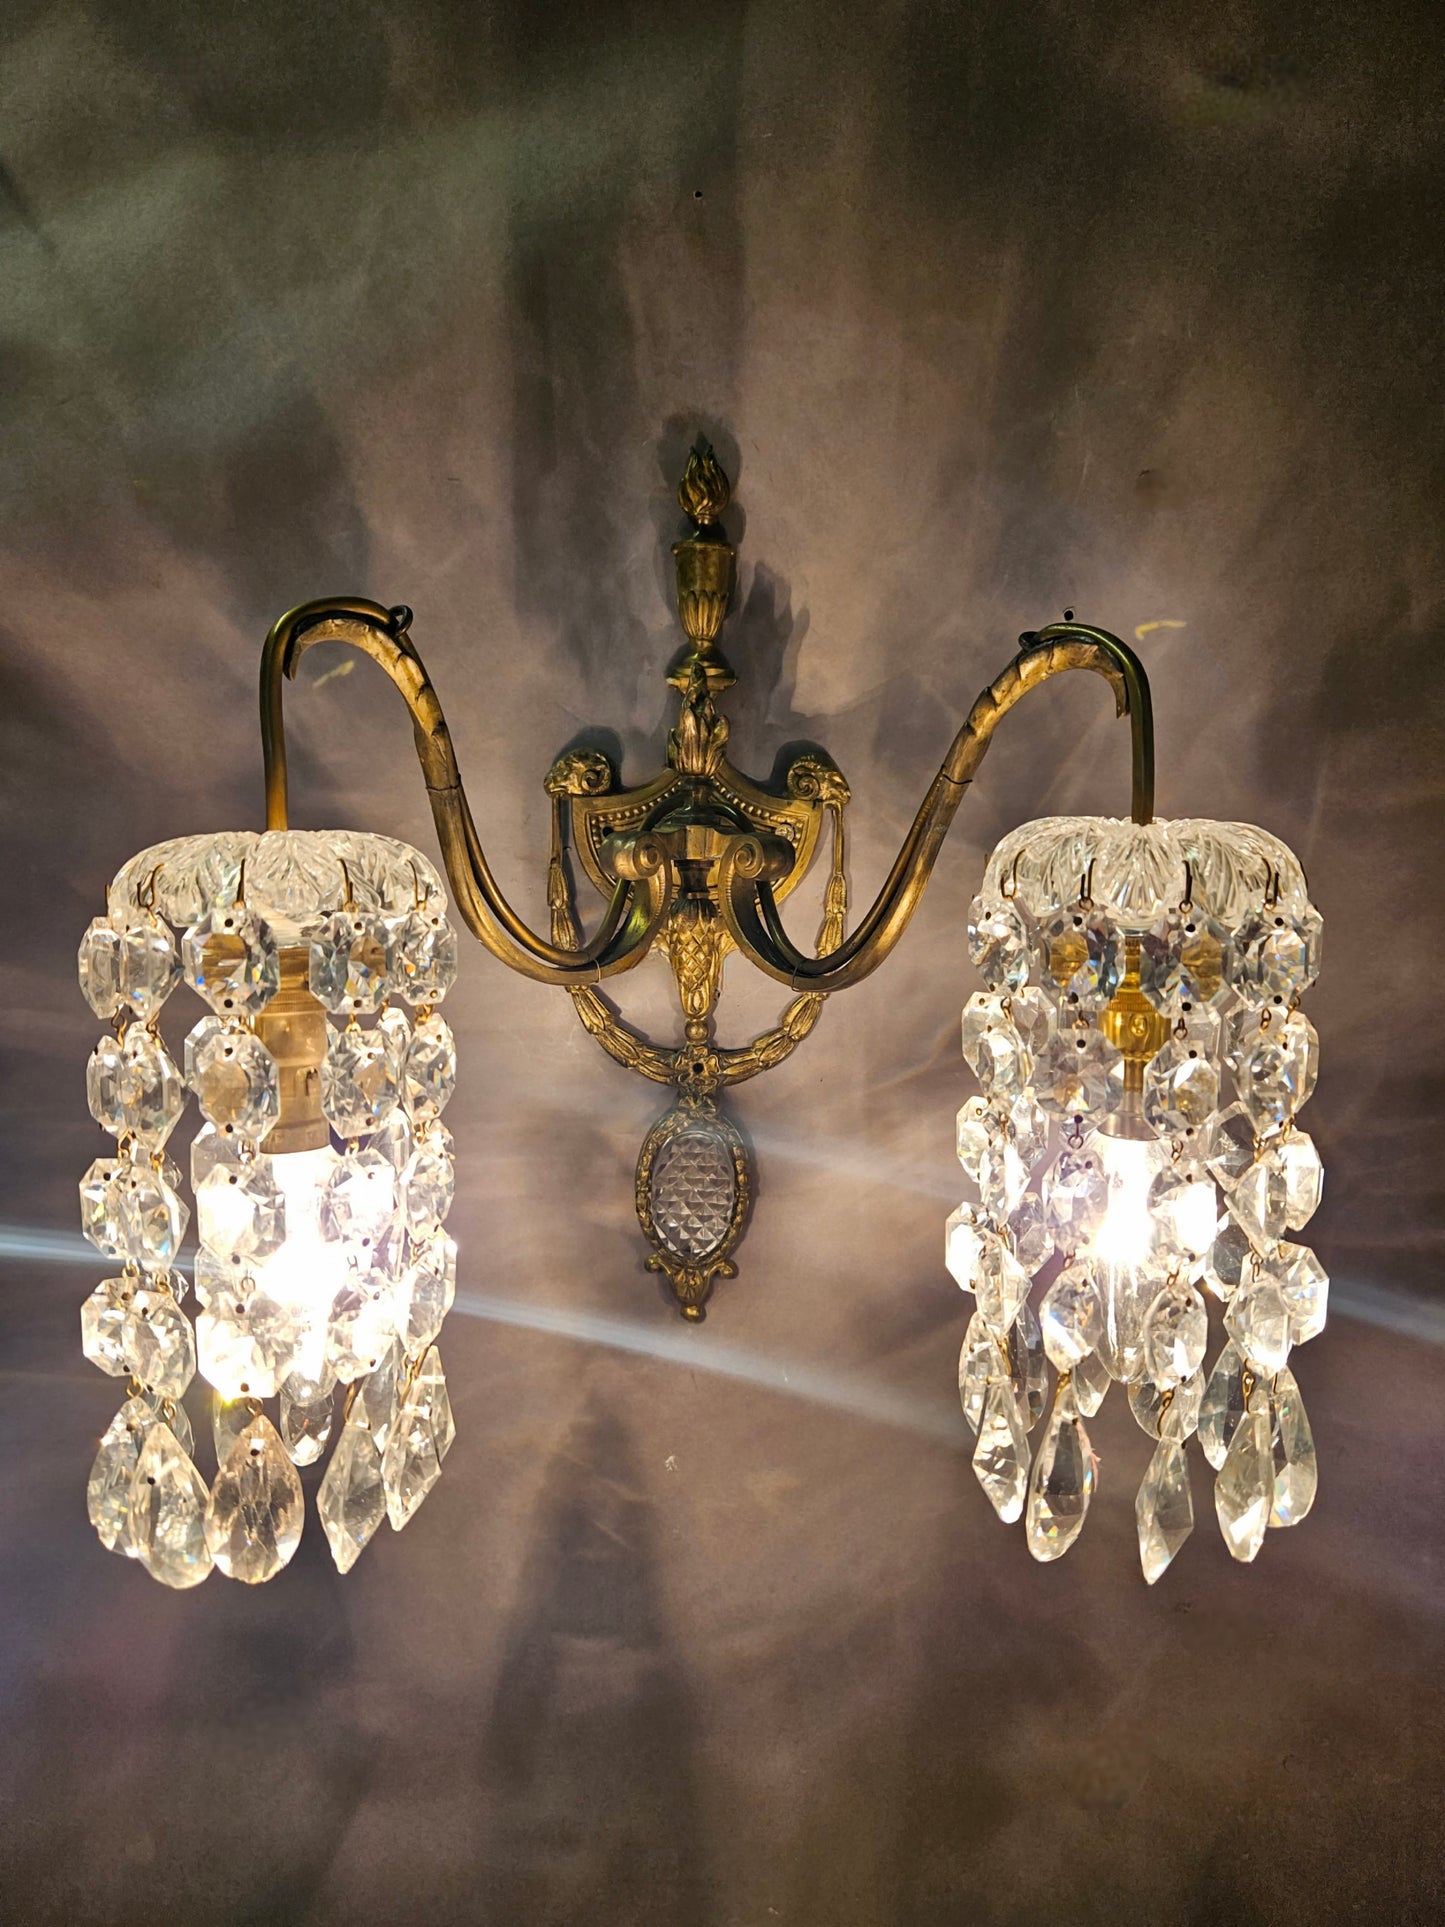 Pair Of 2-Arm Wall Lights With Cut-Glass Strings & Medallions, CA. 1910